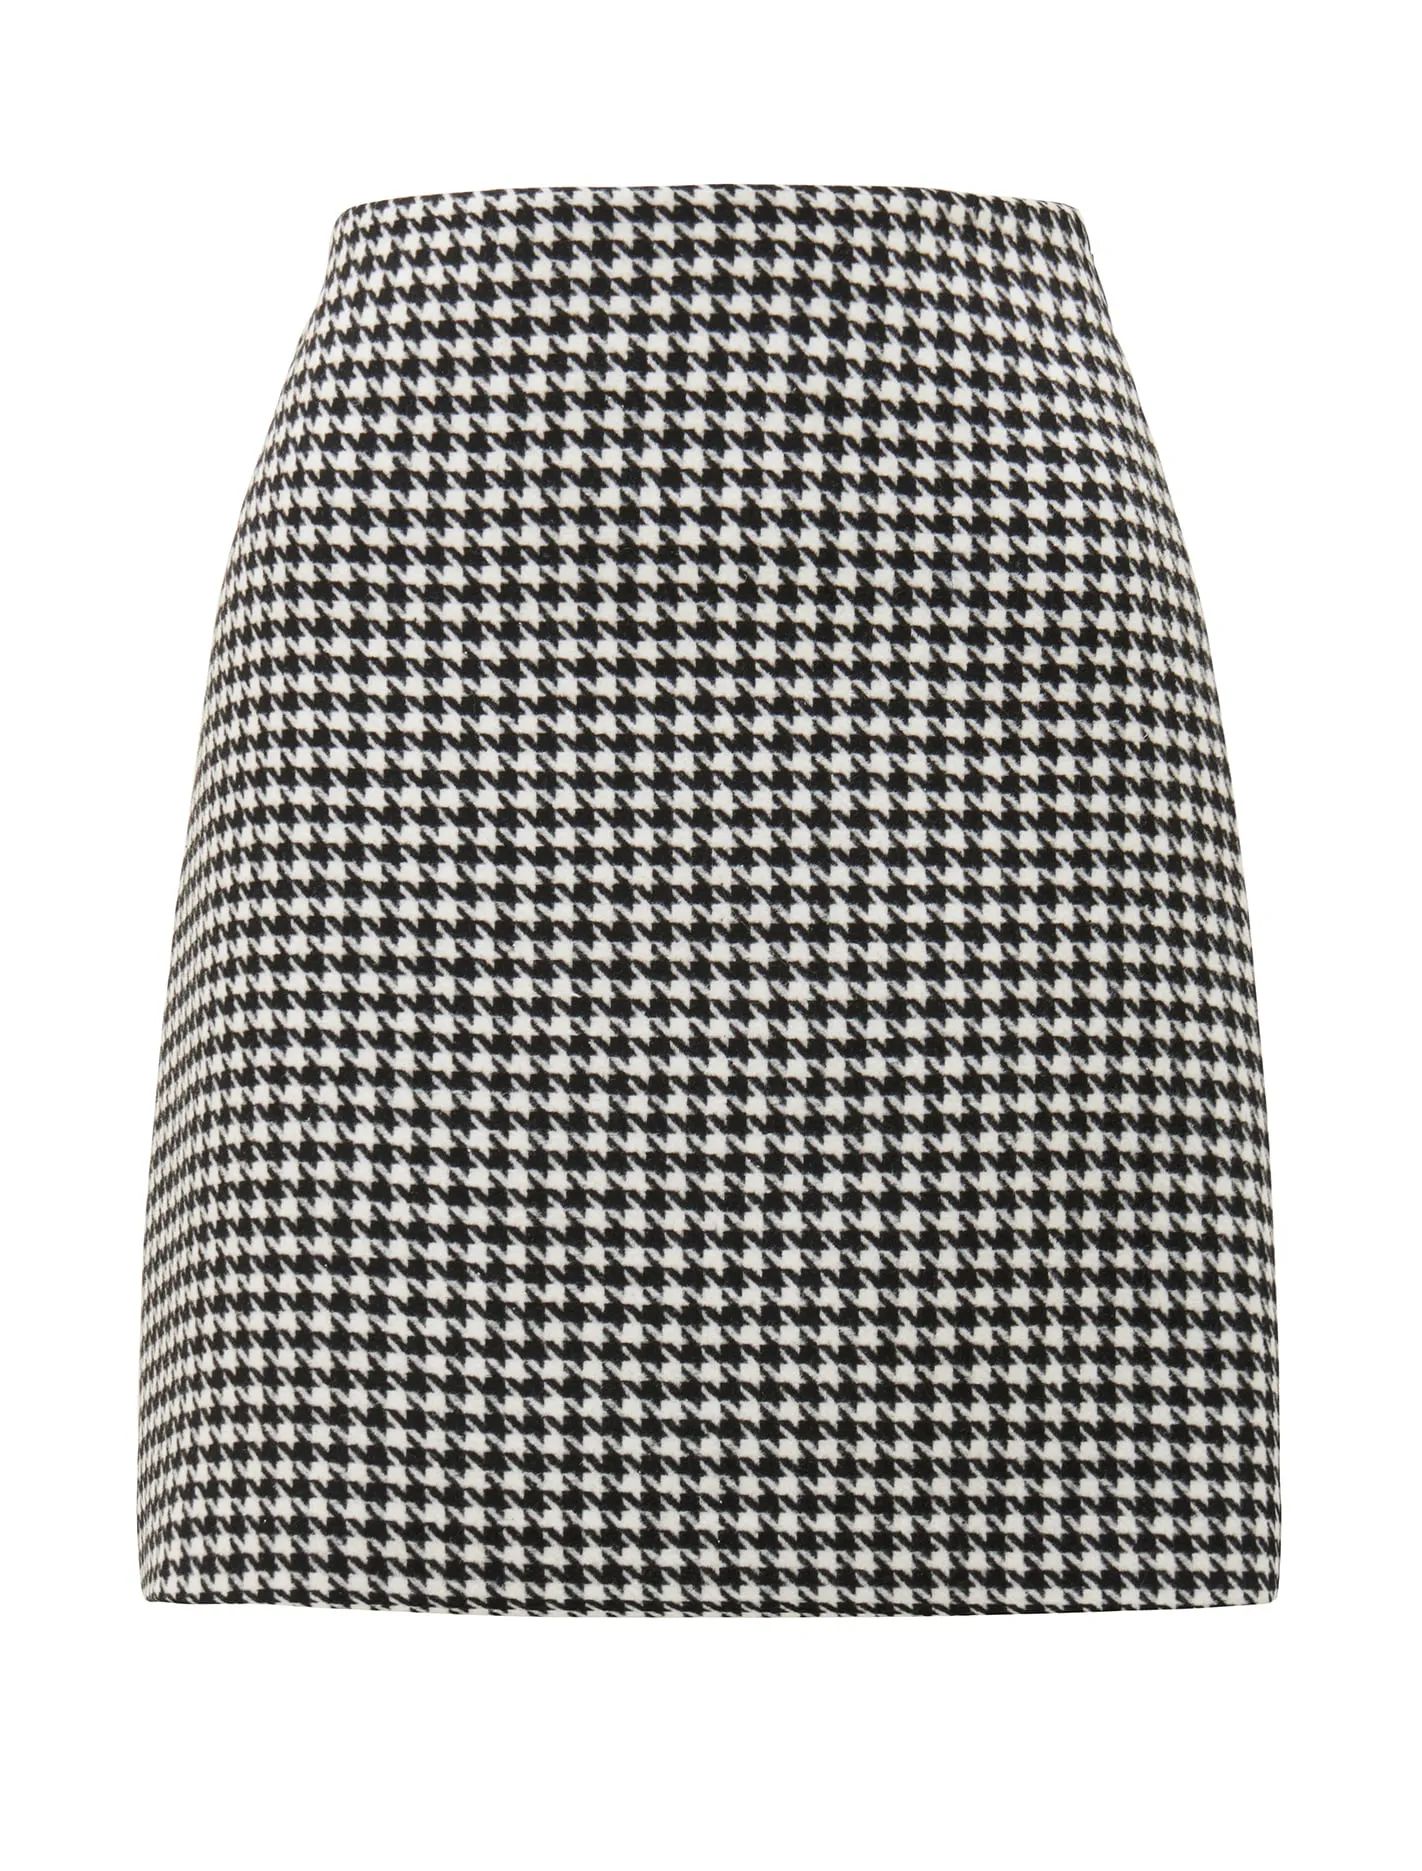 Twiggy Houndstooth Mini Skirt | Forever New (AU)